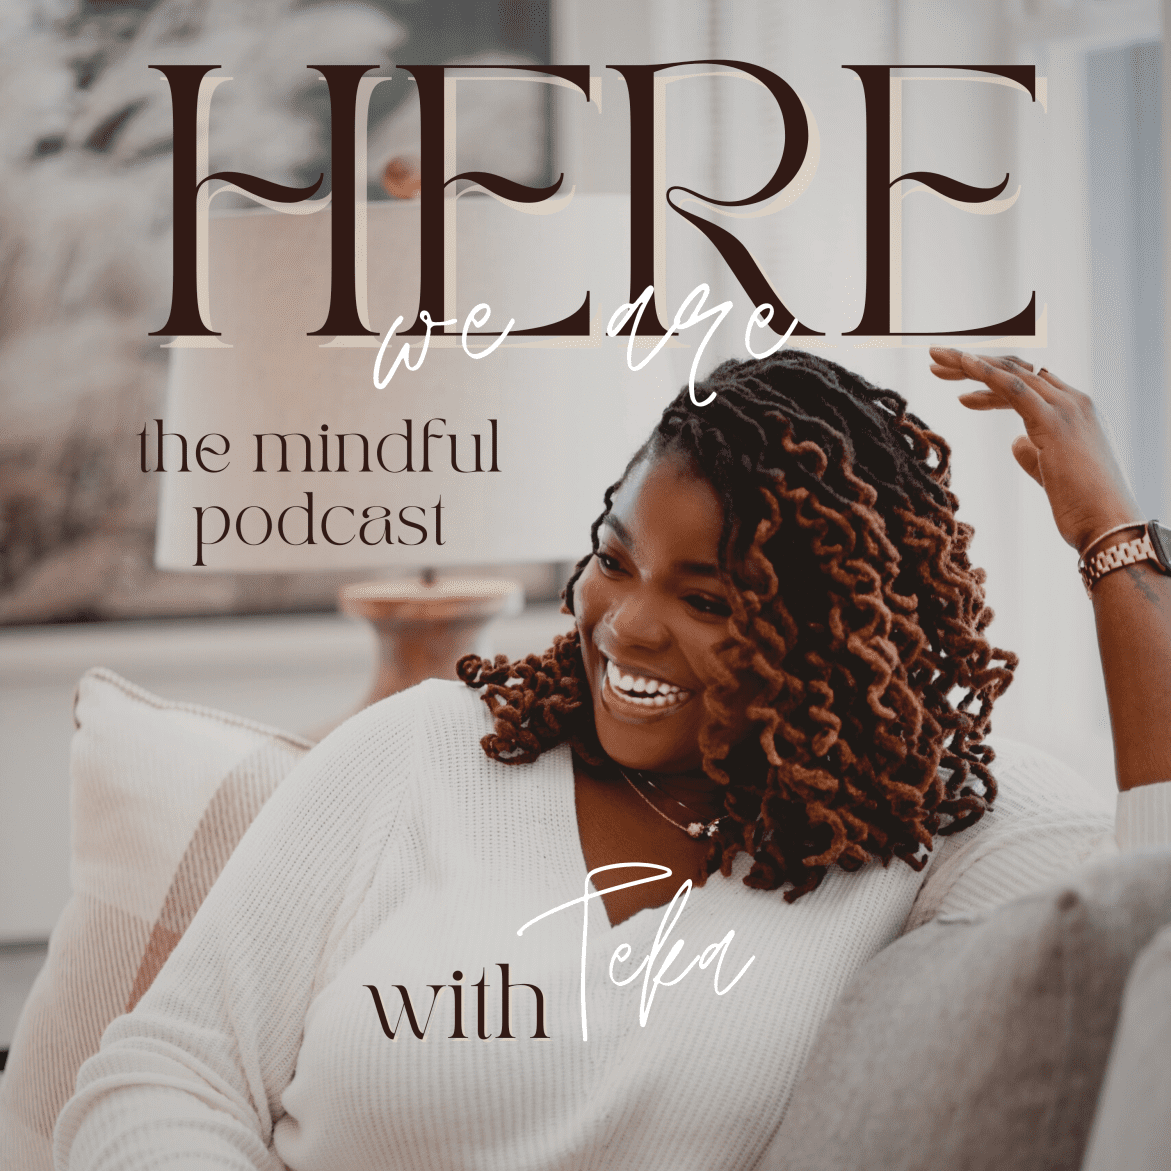 Black Podcasting - S. 1 Ep. 8 "How Did I Get Here?" with Bretton Key